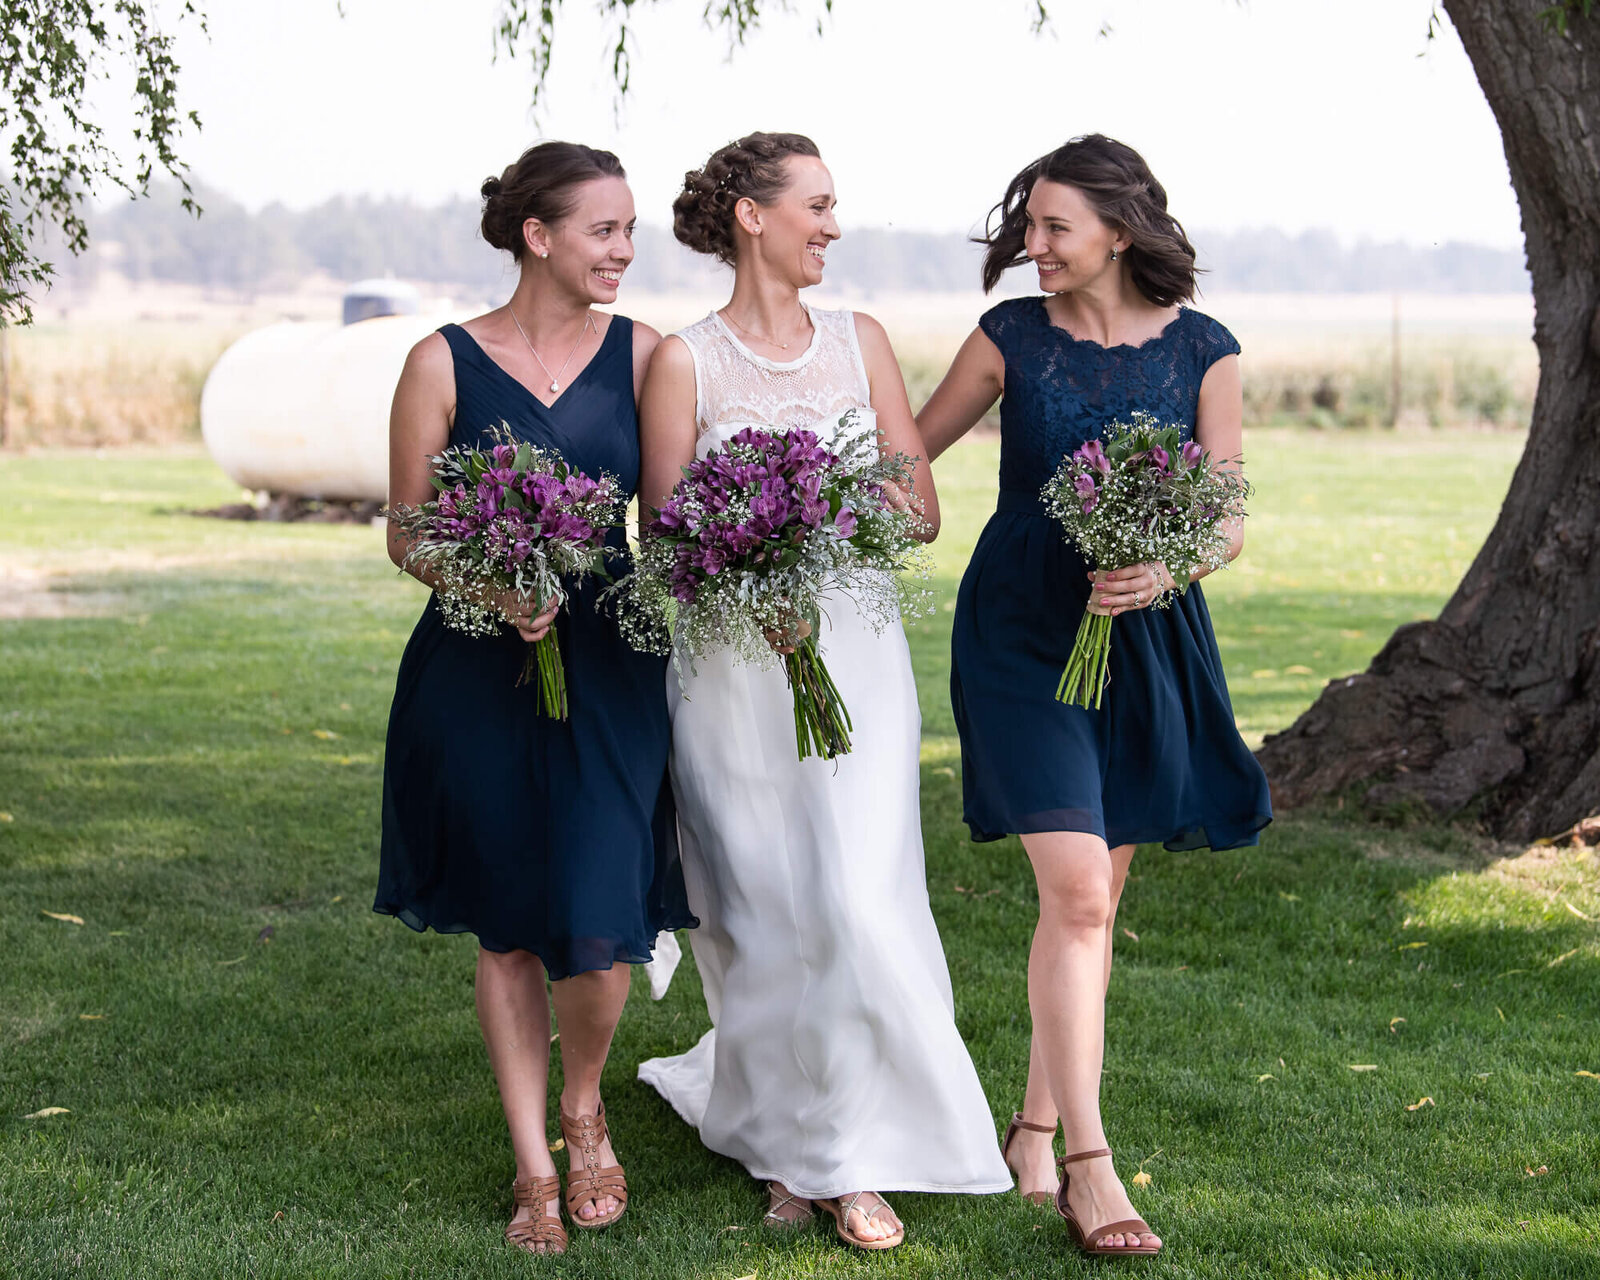 Bride and Bridesmaids  walking and laughing together